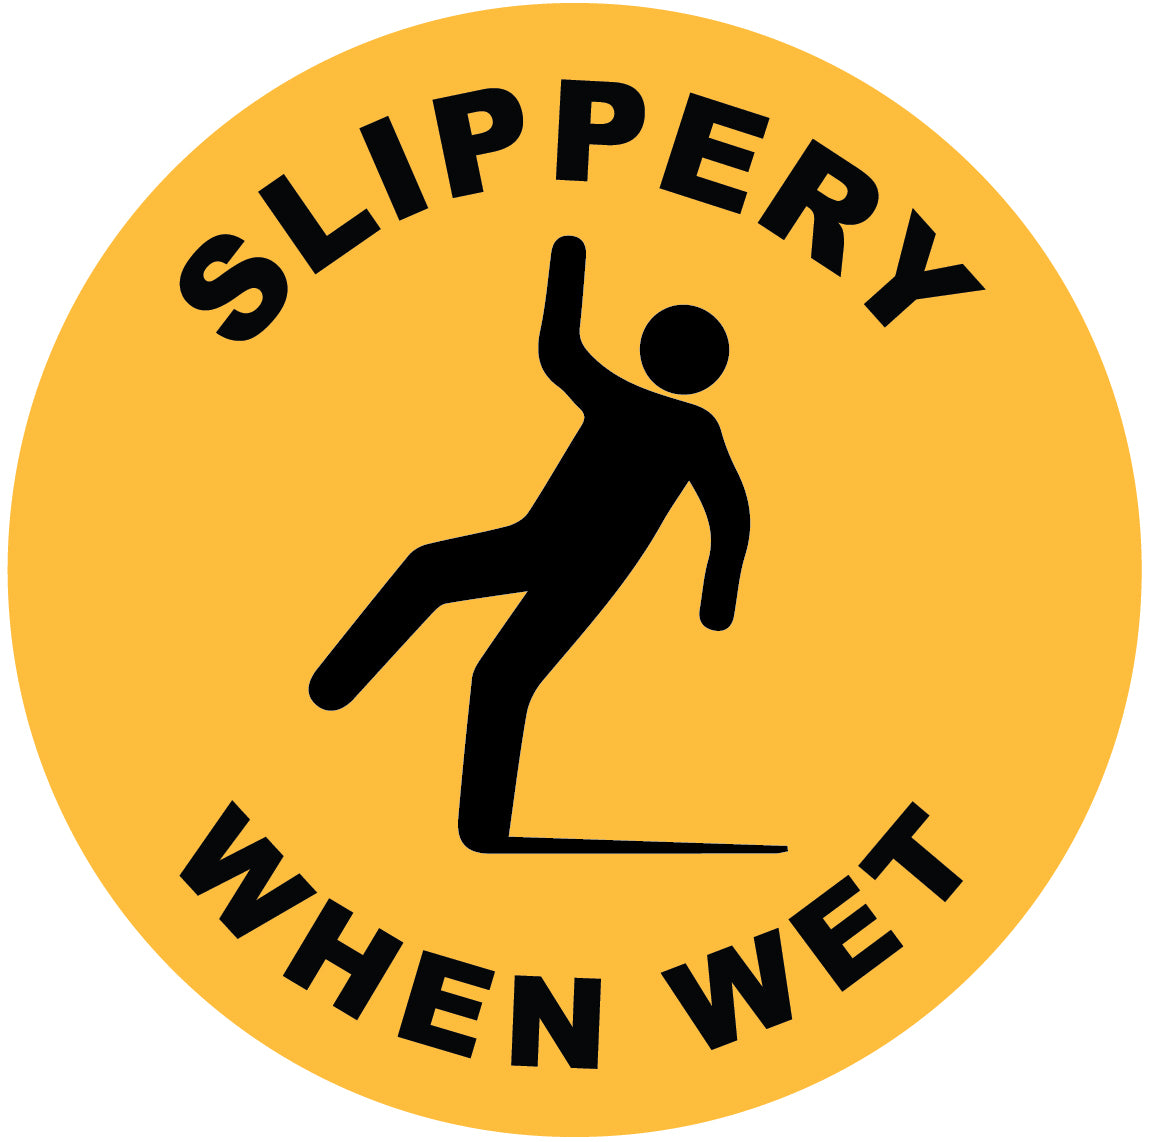 Slippery When Wet Decal